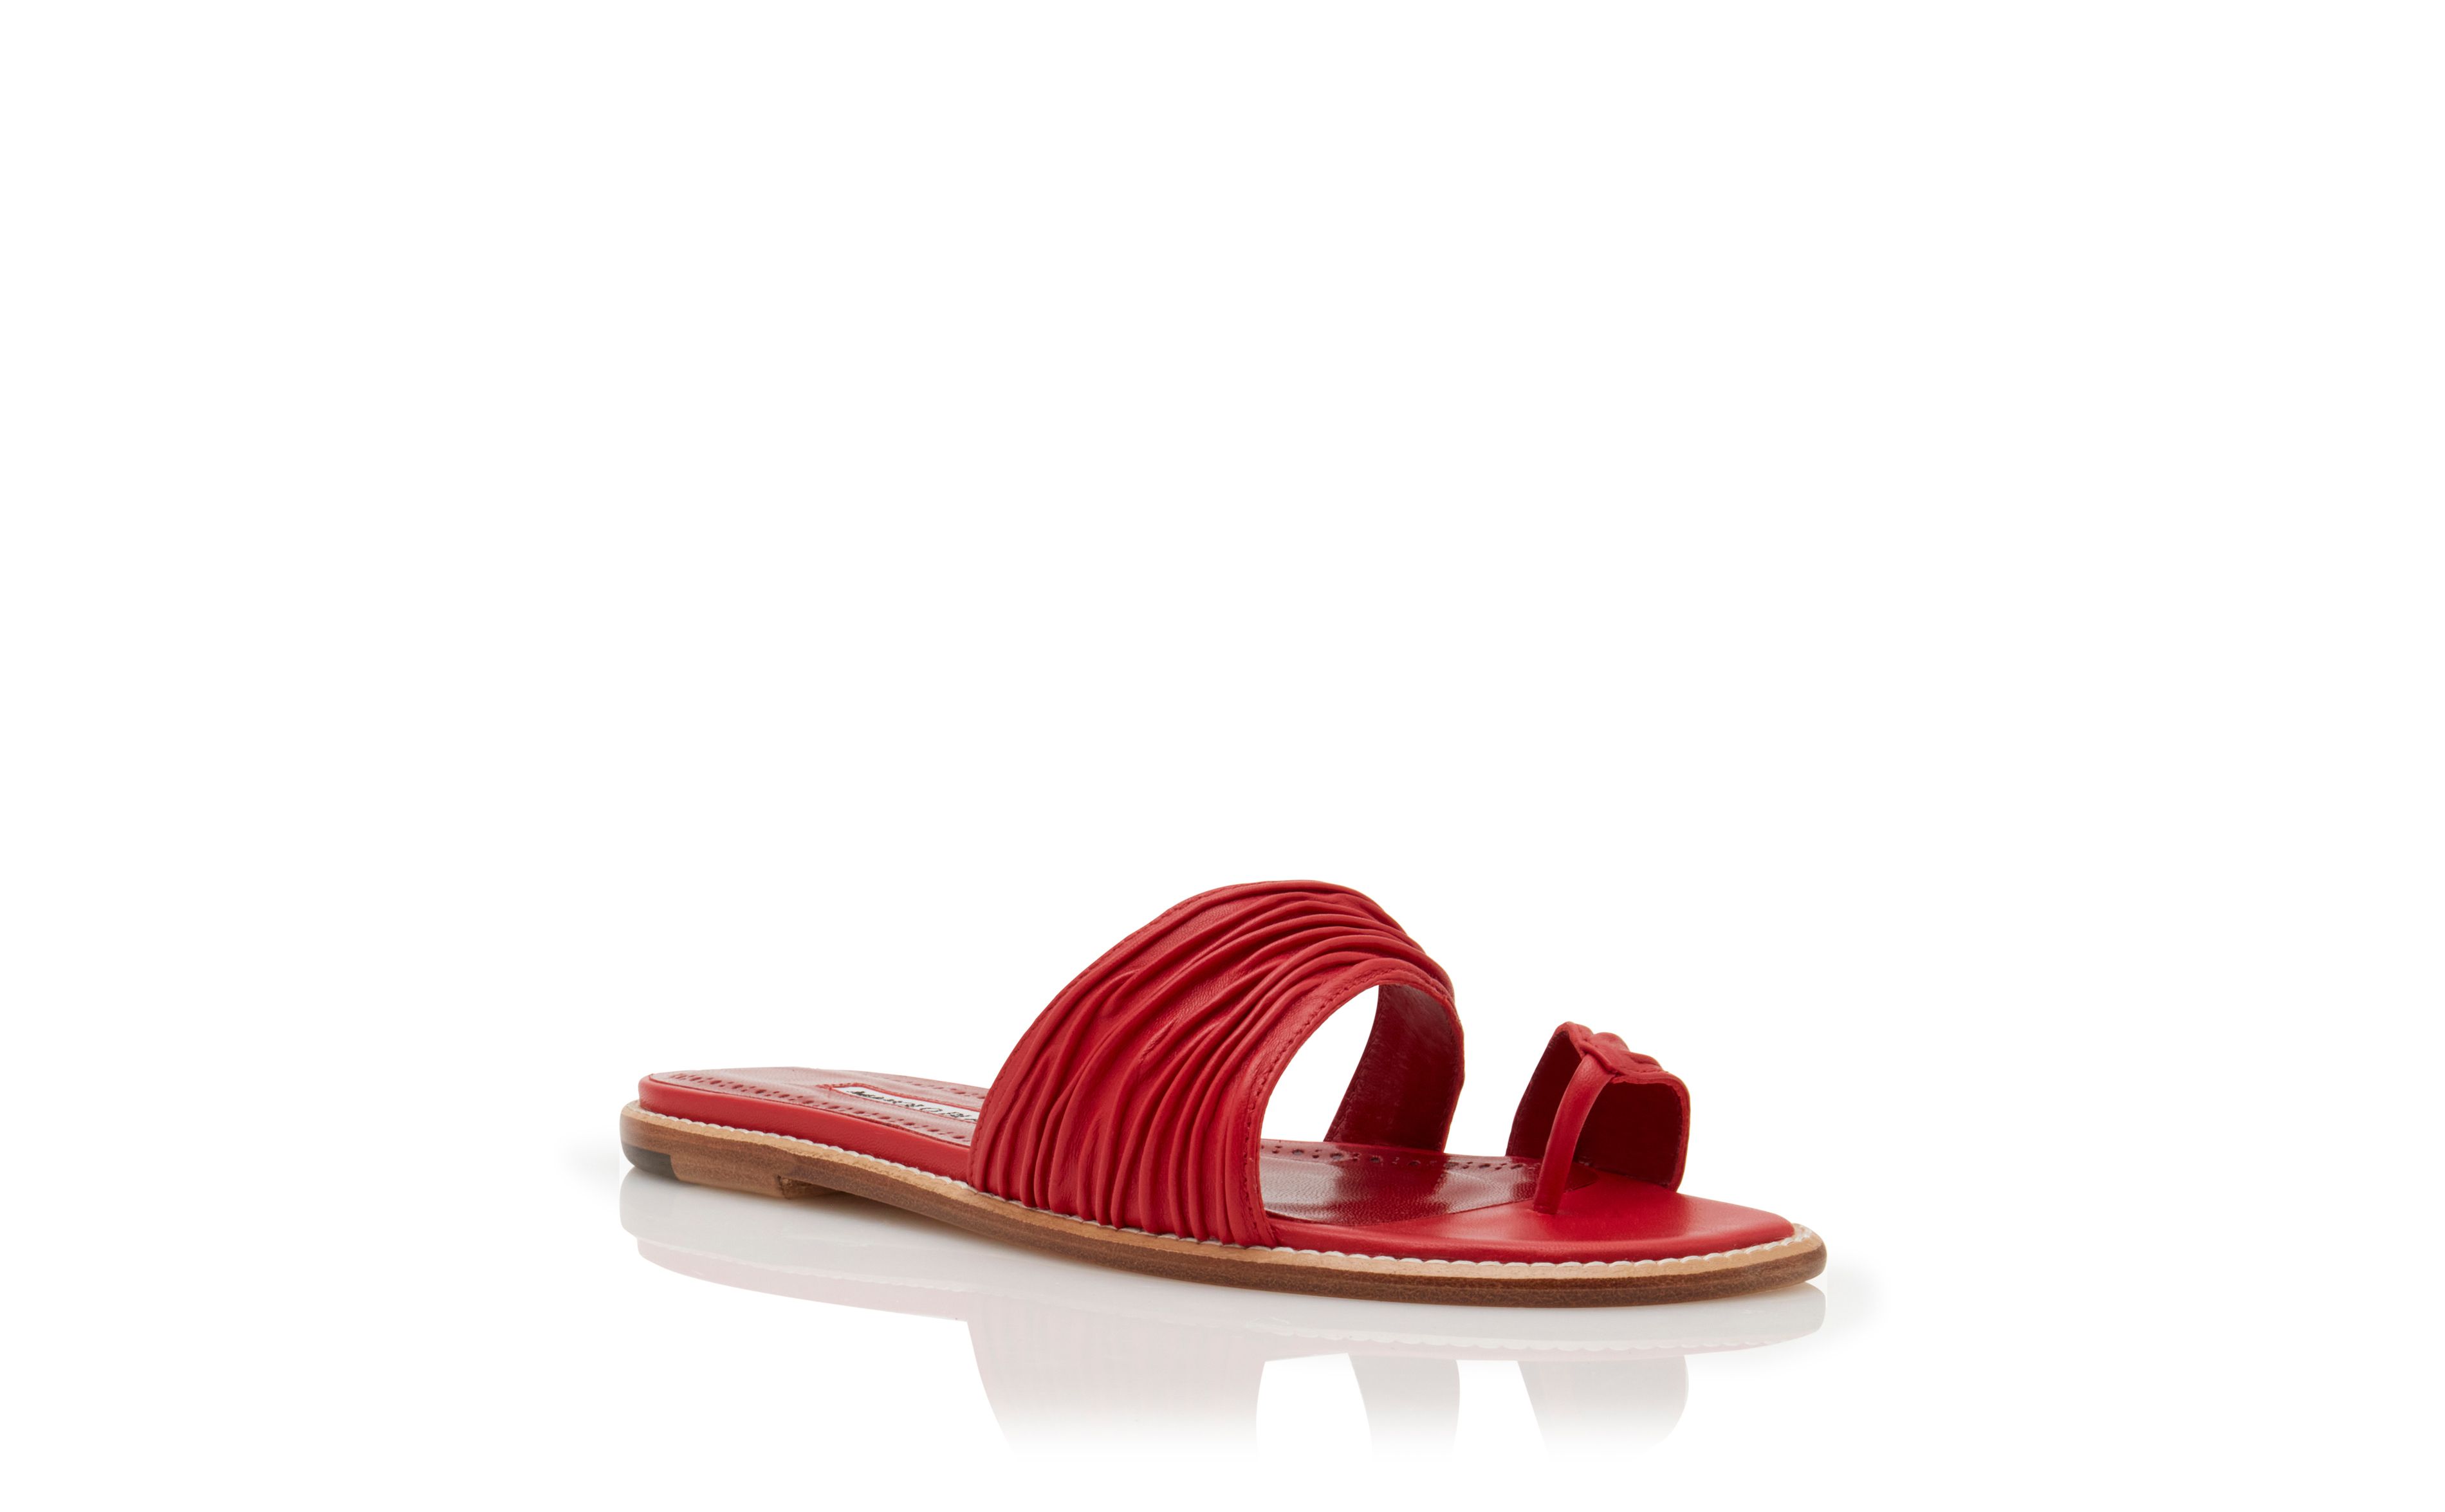 Designer Red Nappa Leather Gathered Flat Sandals  - Image Upsell